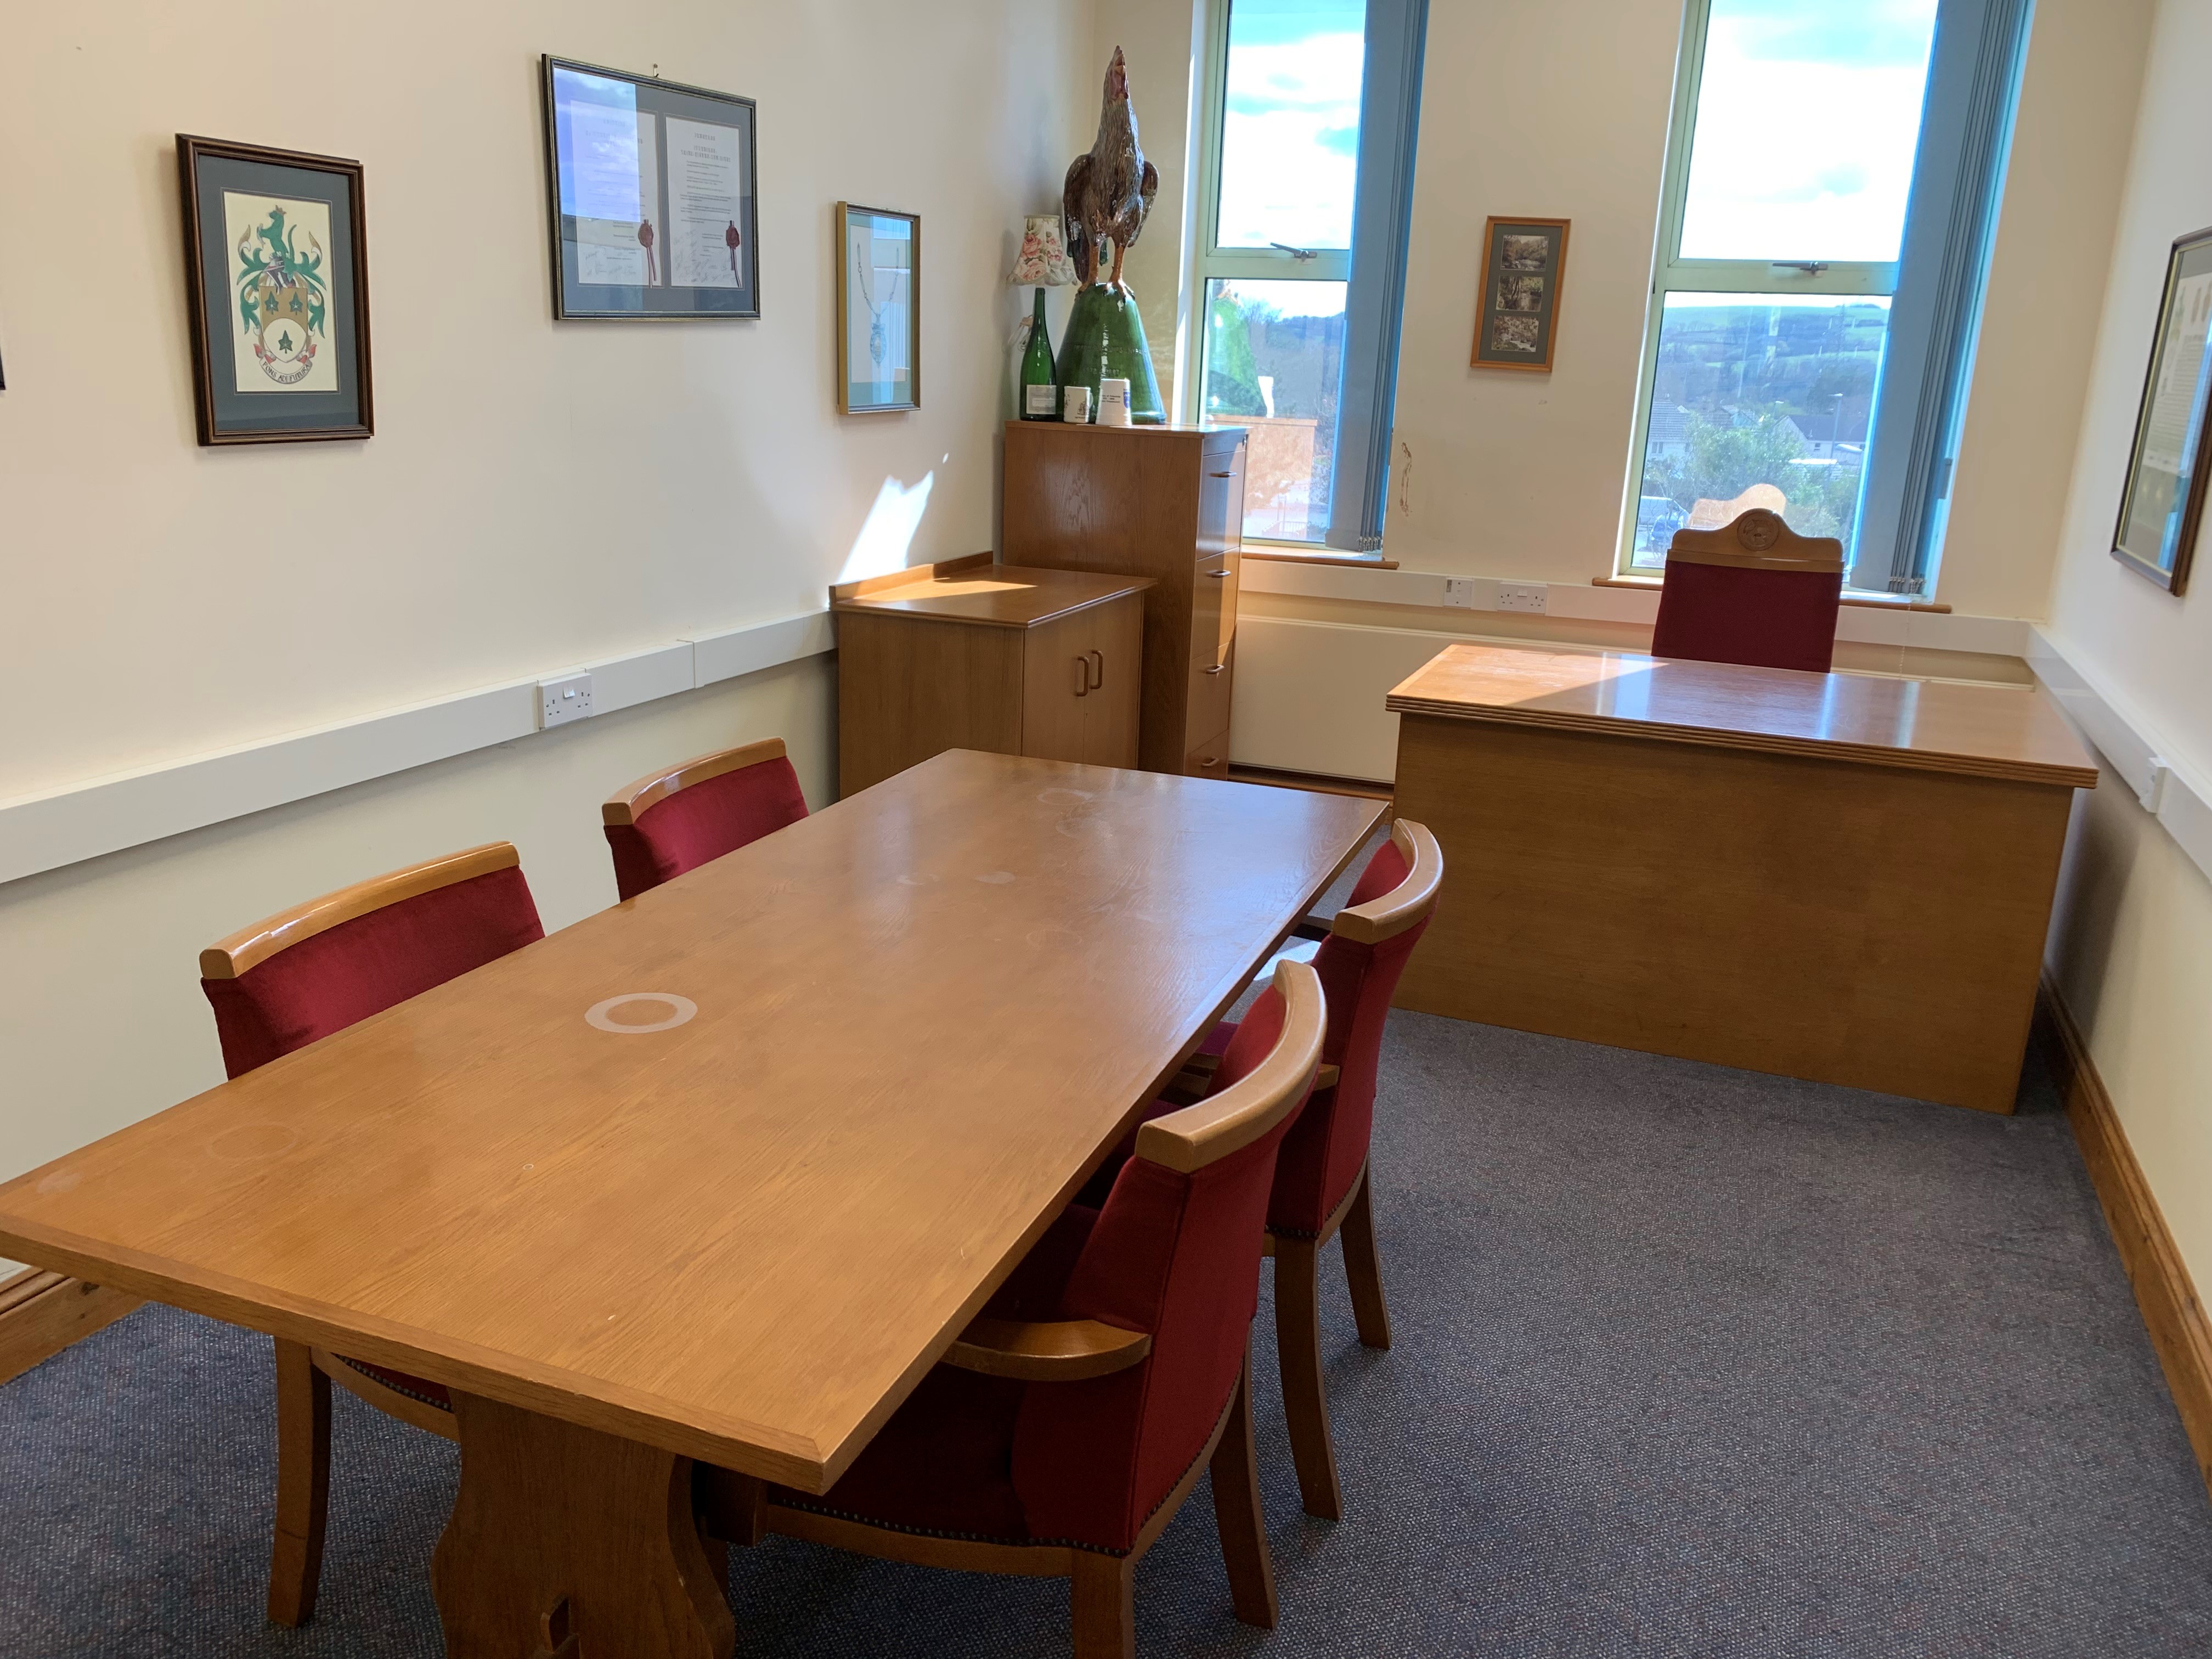 Mayor's Room set out for 4 people